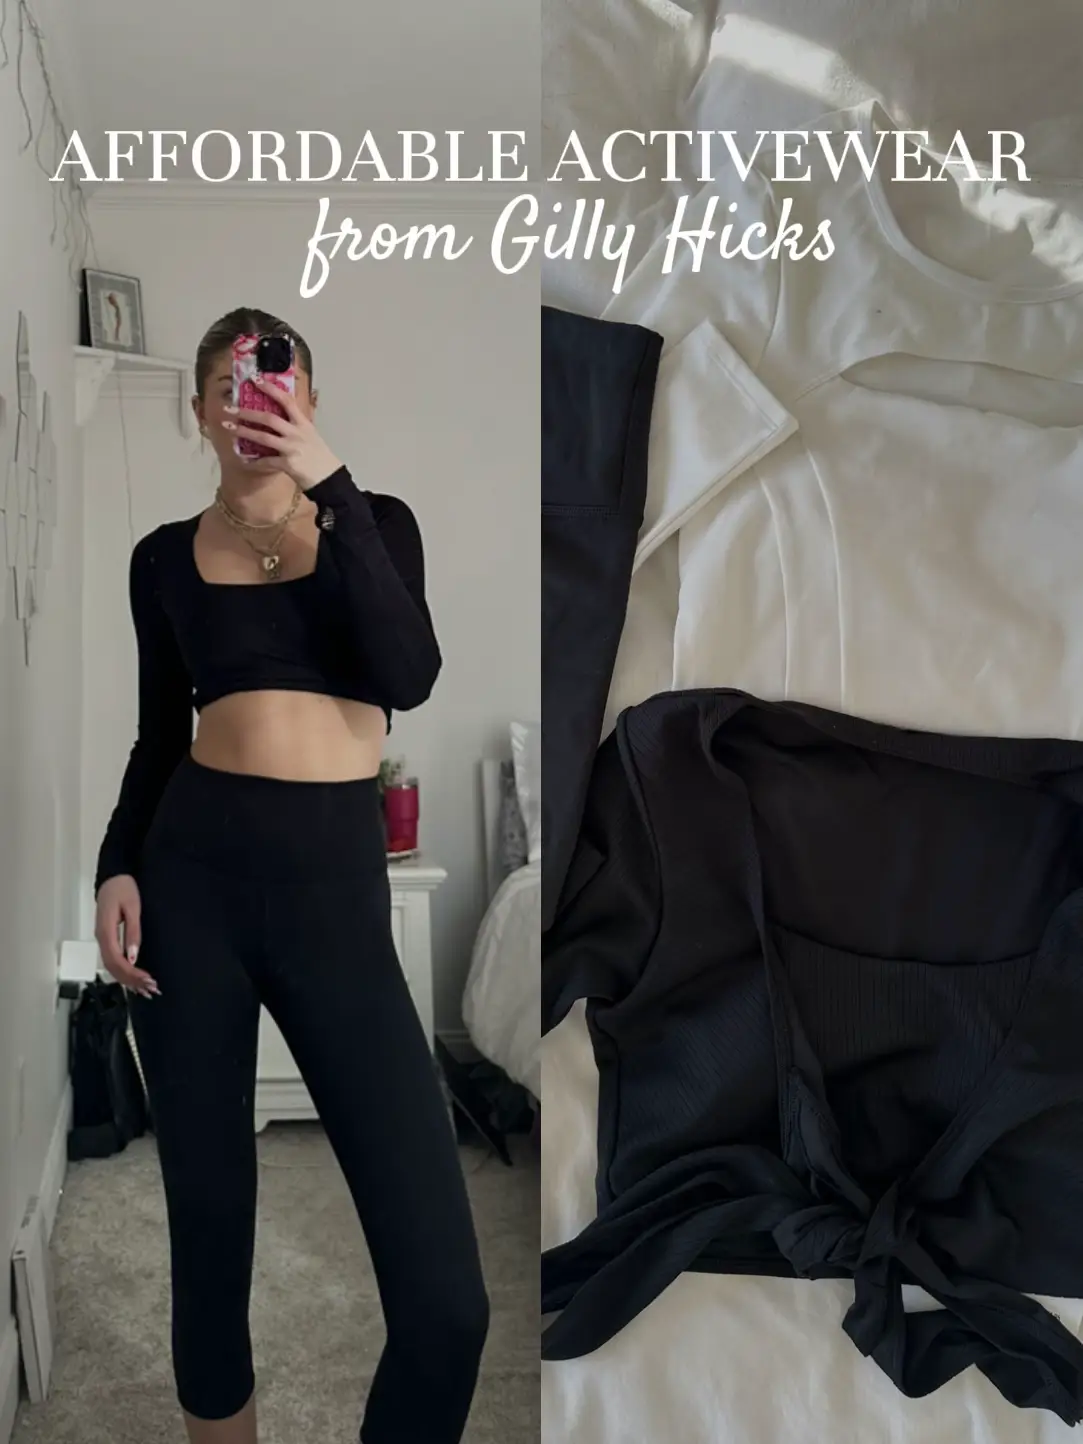 Hollister Gilly Hicks Sleep Tank Top Size M - $11 - From Sofia